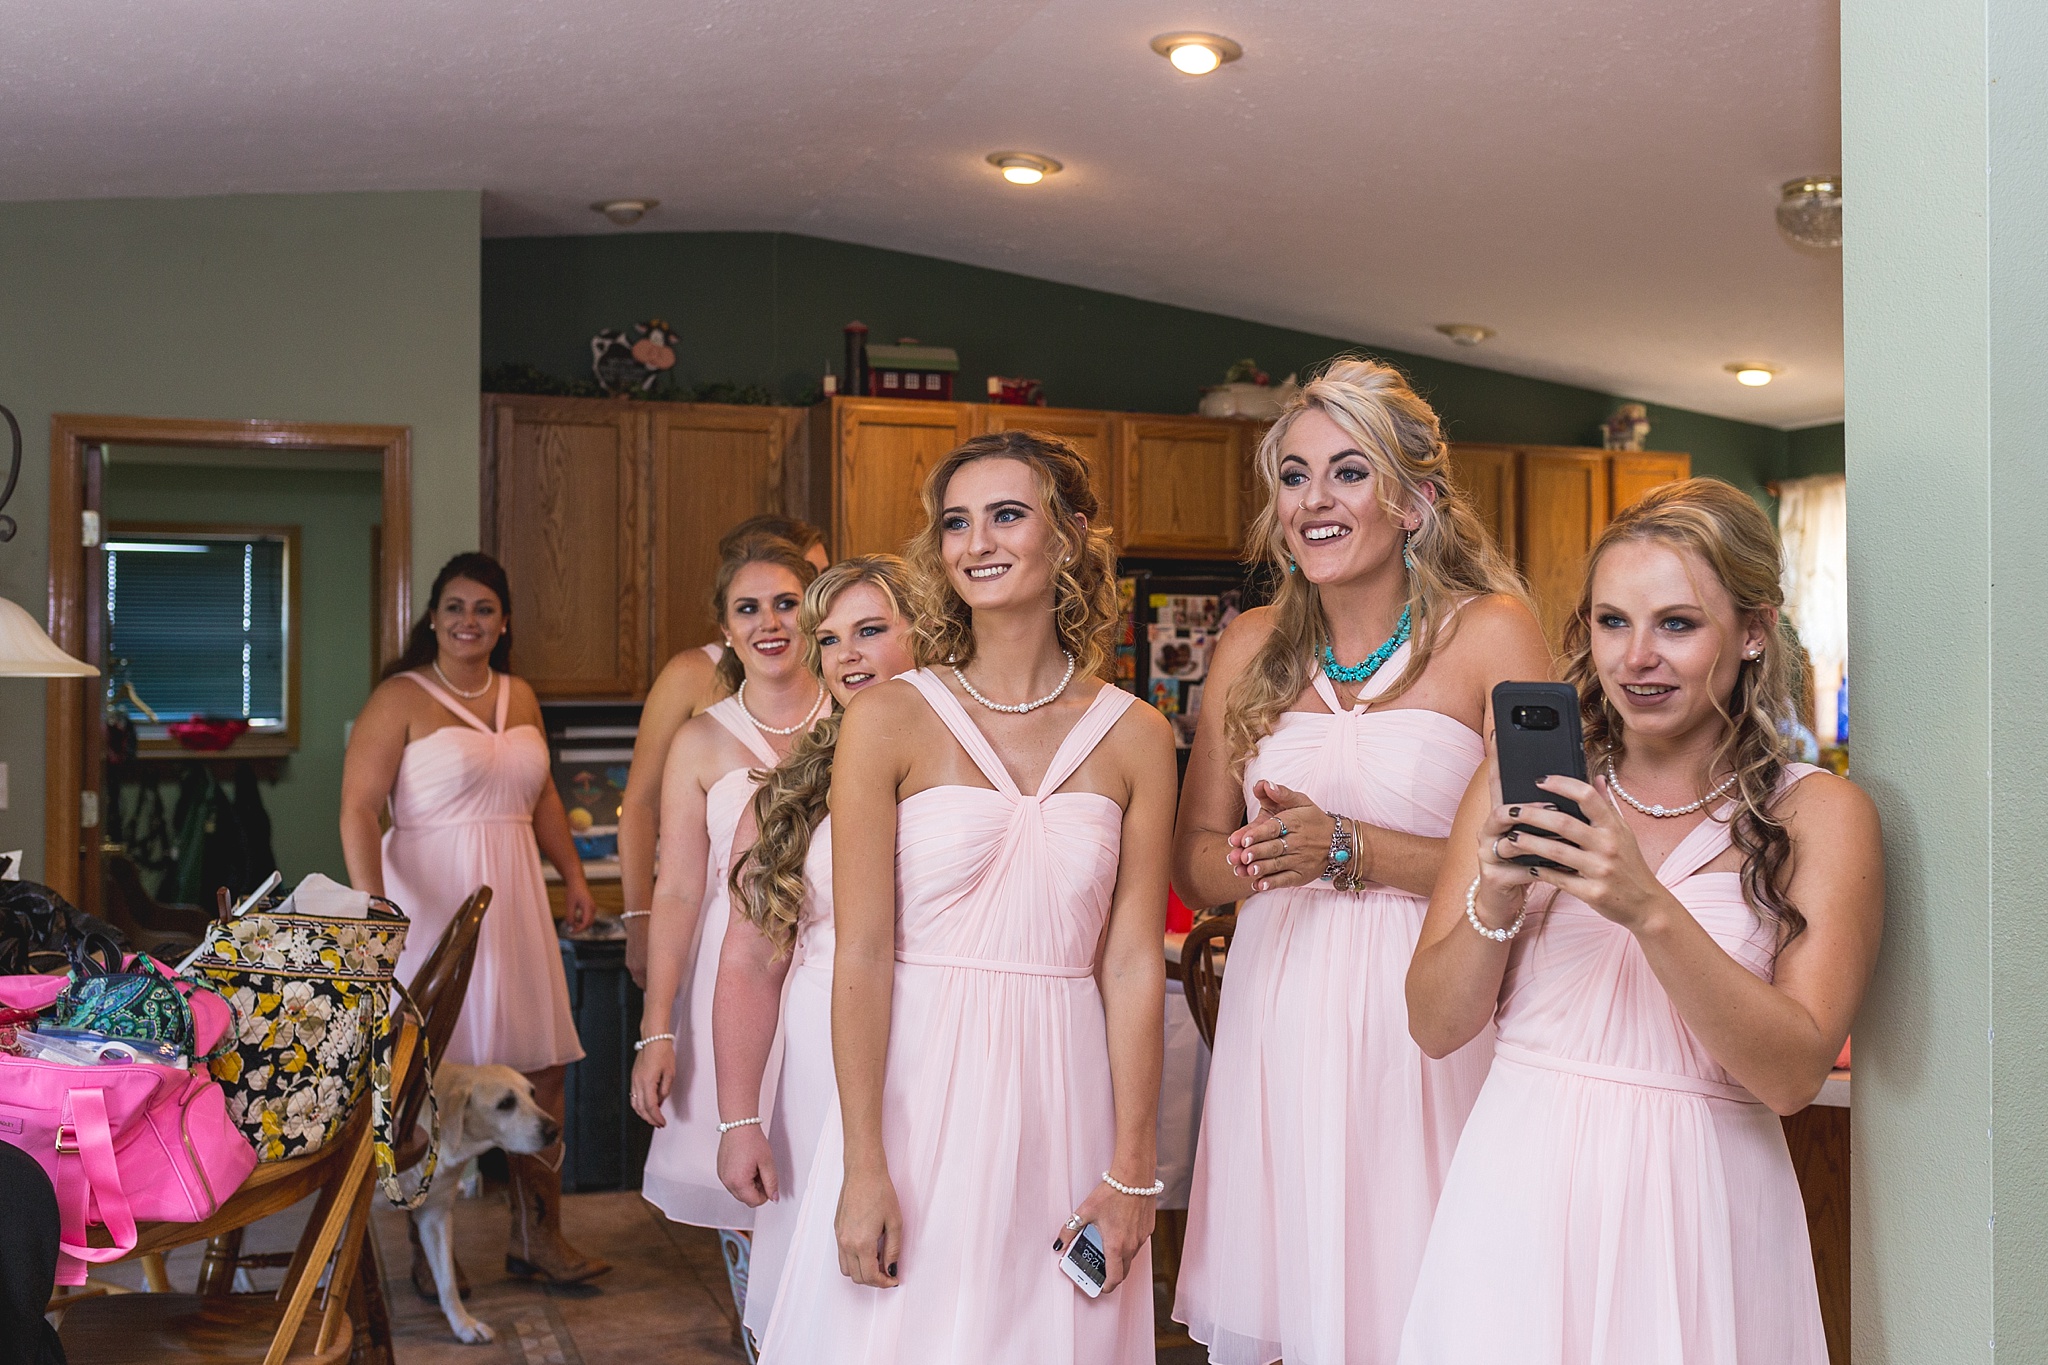 Bridesmaids seeing the bride for the first time. Katie & Jake’s Castle Rock Wedding at the Douglas County Fairgrounds by Colorado Wedding Photographer, Jennifer Garza. Colorado Wedding Photographer, Colorado Wedding Photography, Douglas County Fairgrounds Wedding Photography, Castle Rock Wedding Photography, Castle Rock Wedding Photographer, Colorado Wedding Photography, Colorado Wedding Photographer, Colorado Wedding, Rustic Wedding, Colorado Bride, Rocky Mountain Bride